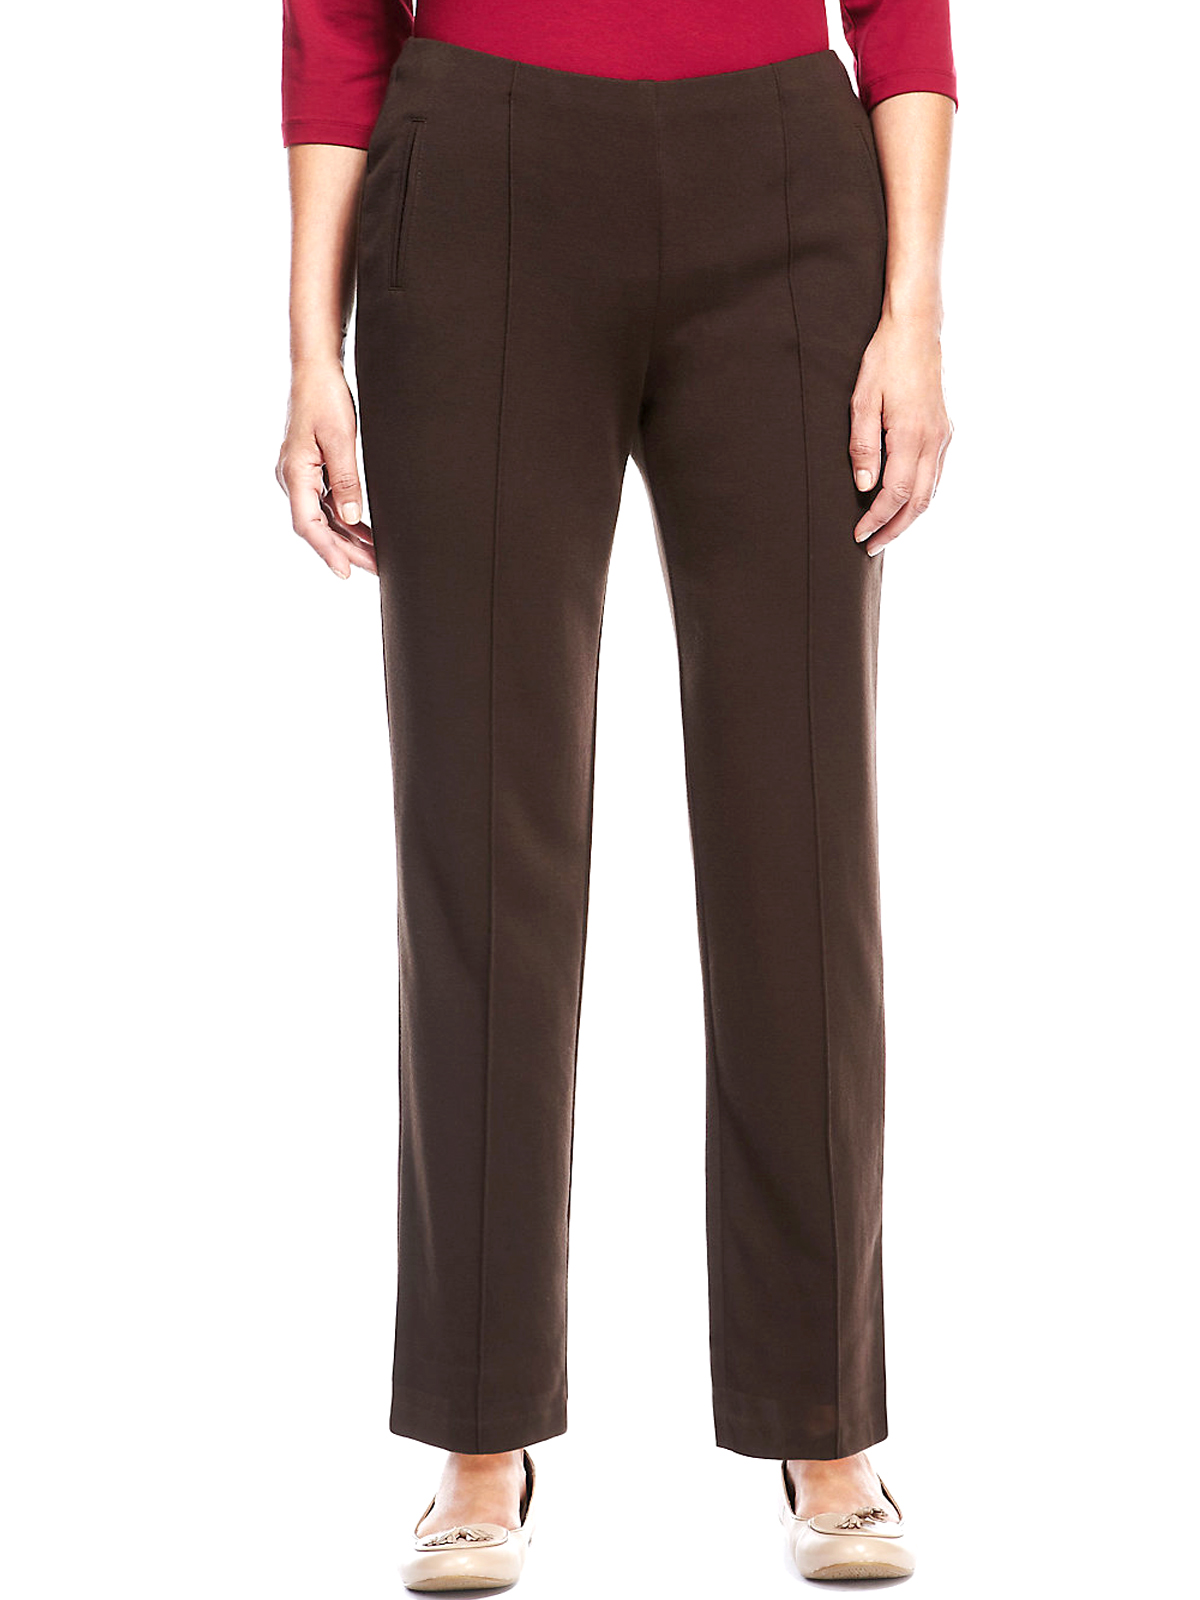 Marks and Spencer - - M&5 CHOCOLATE Pull On Ponte Trousers - Size 14 to 20